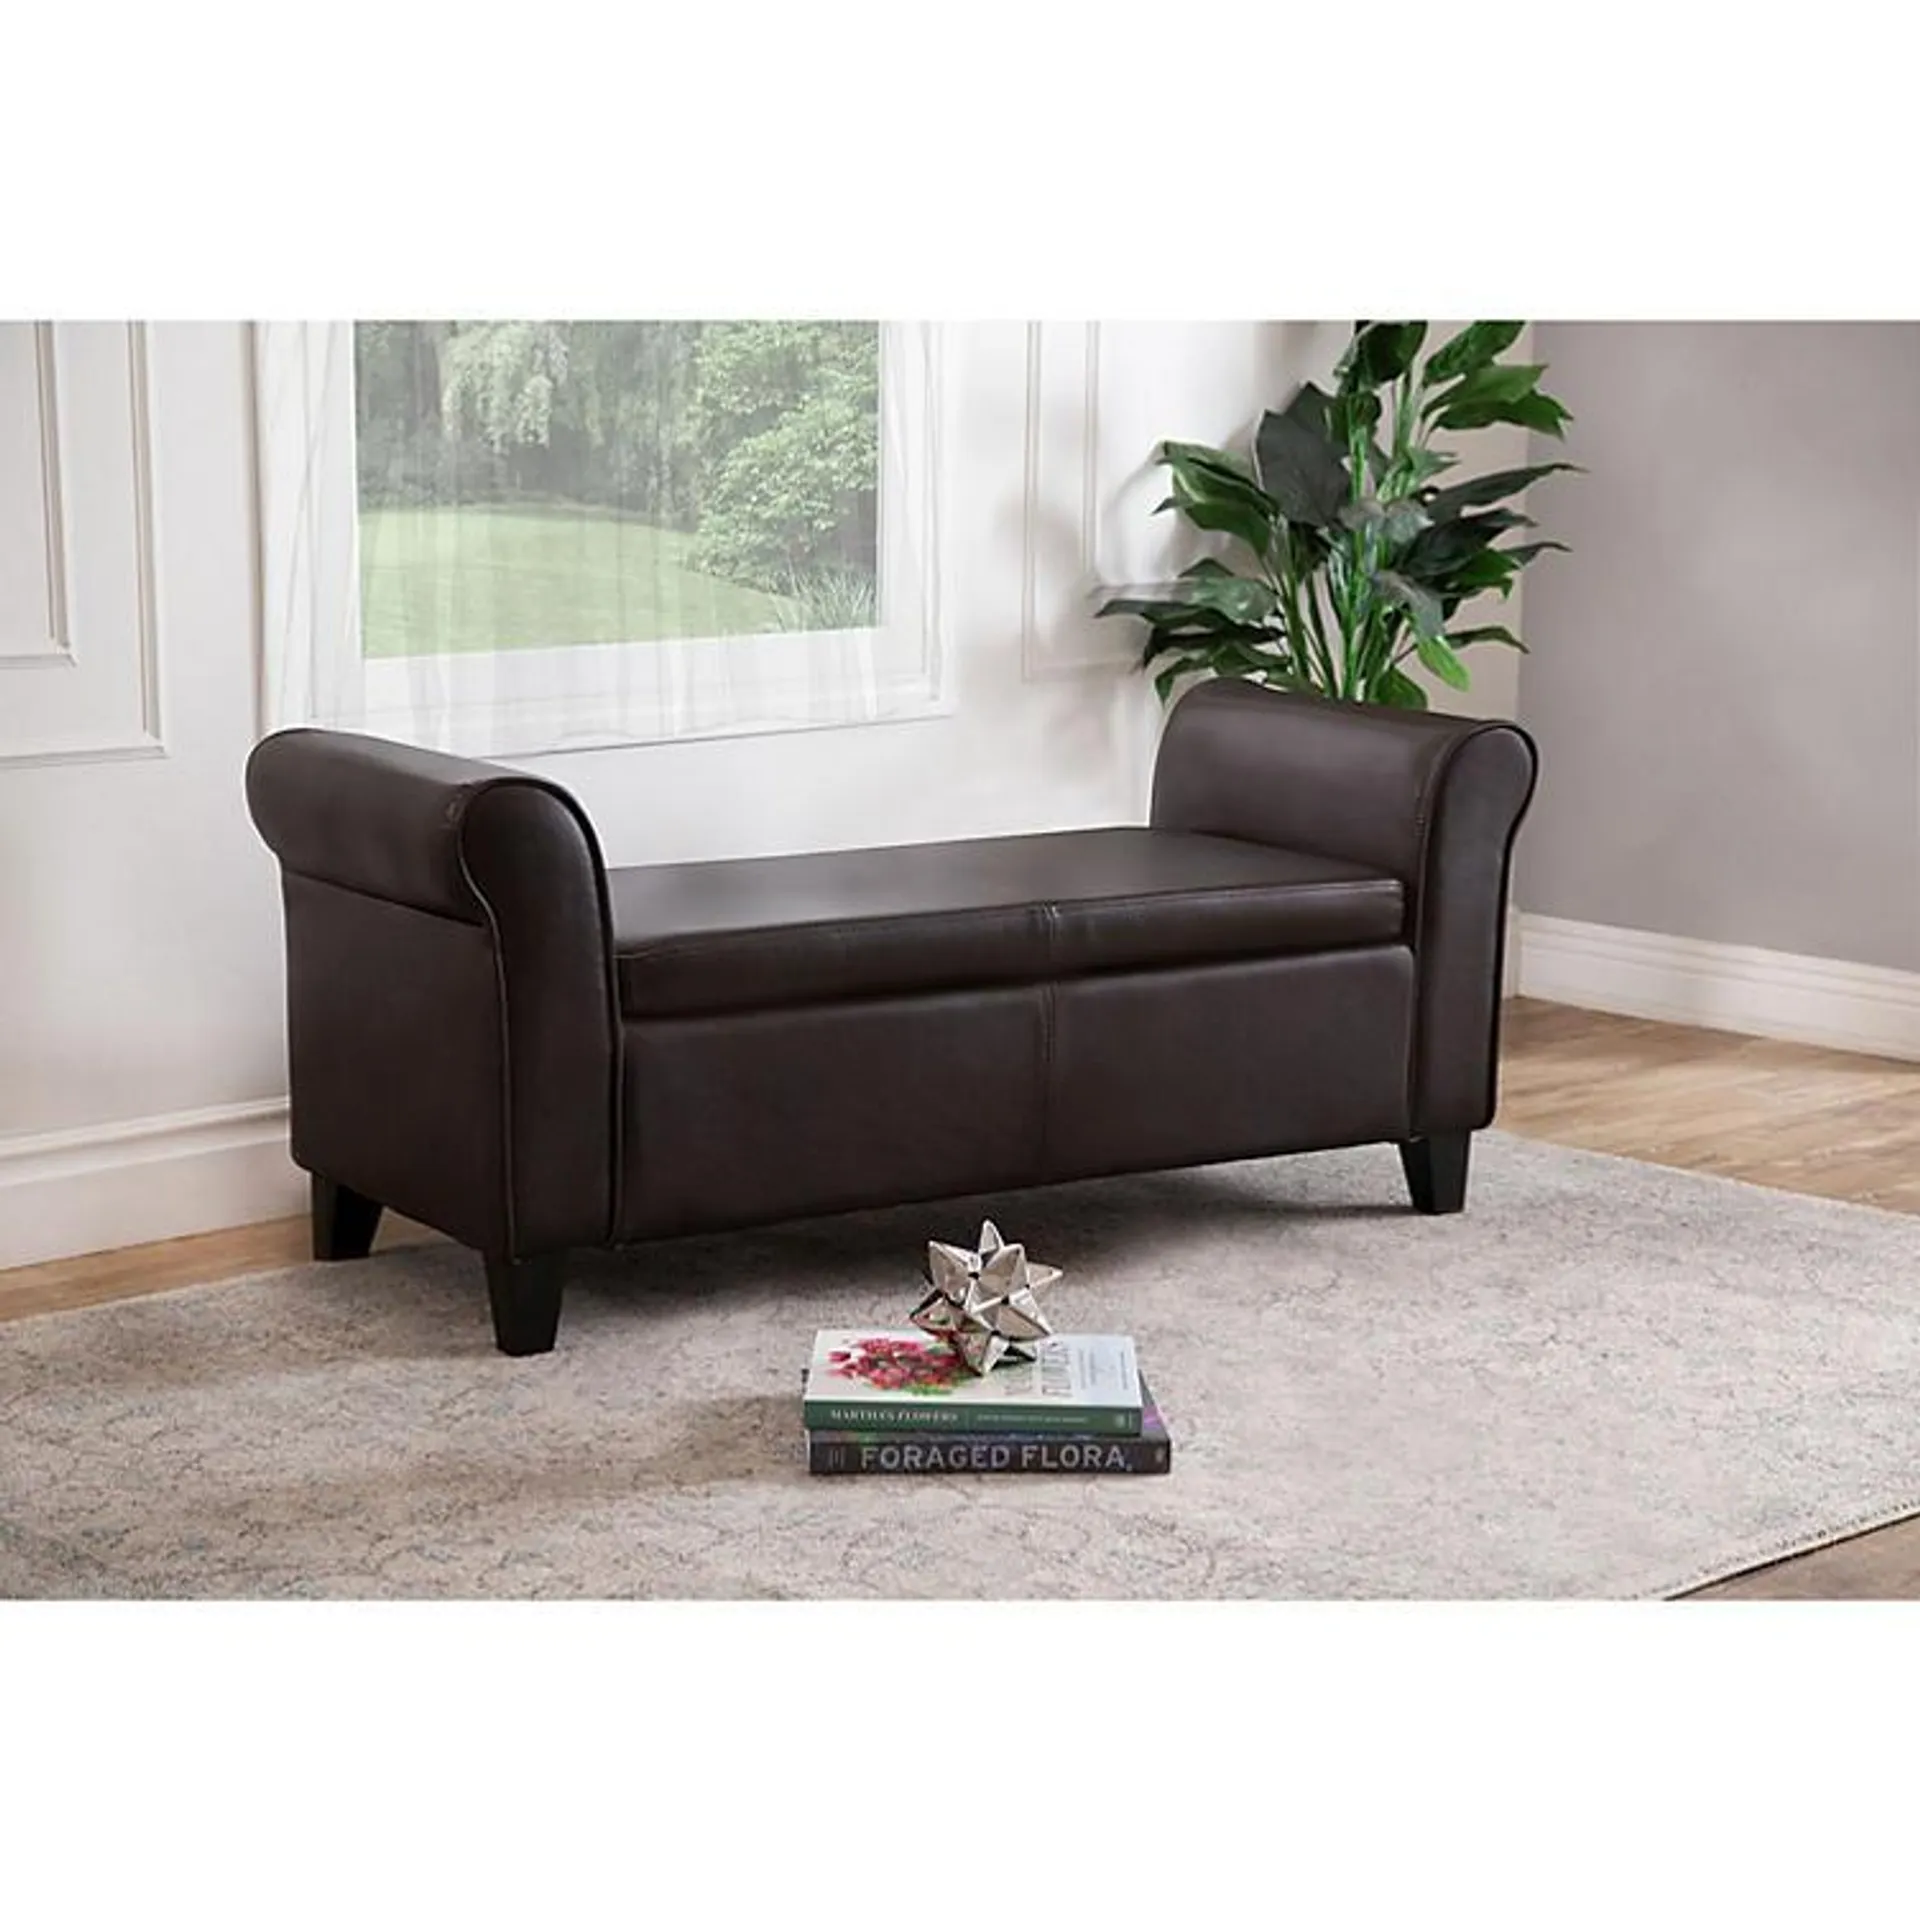 Harlow Bonded Leather Ottoman Storage Bench, Brown